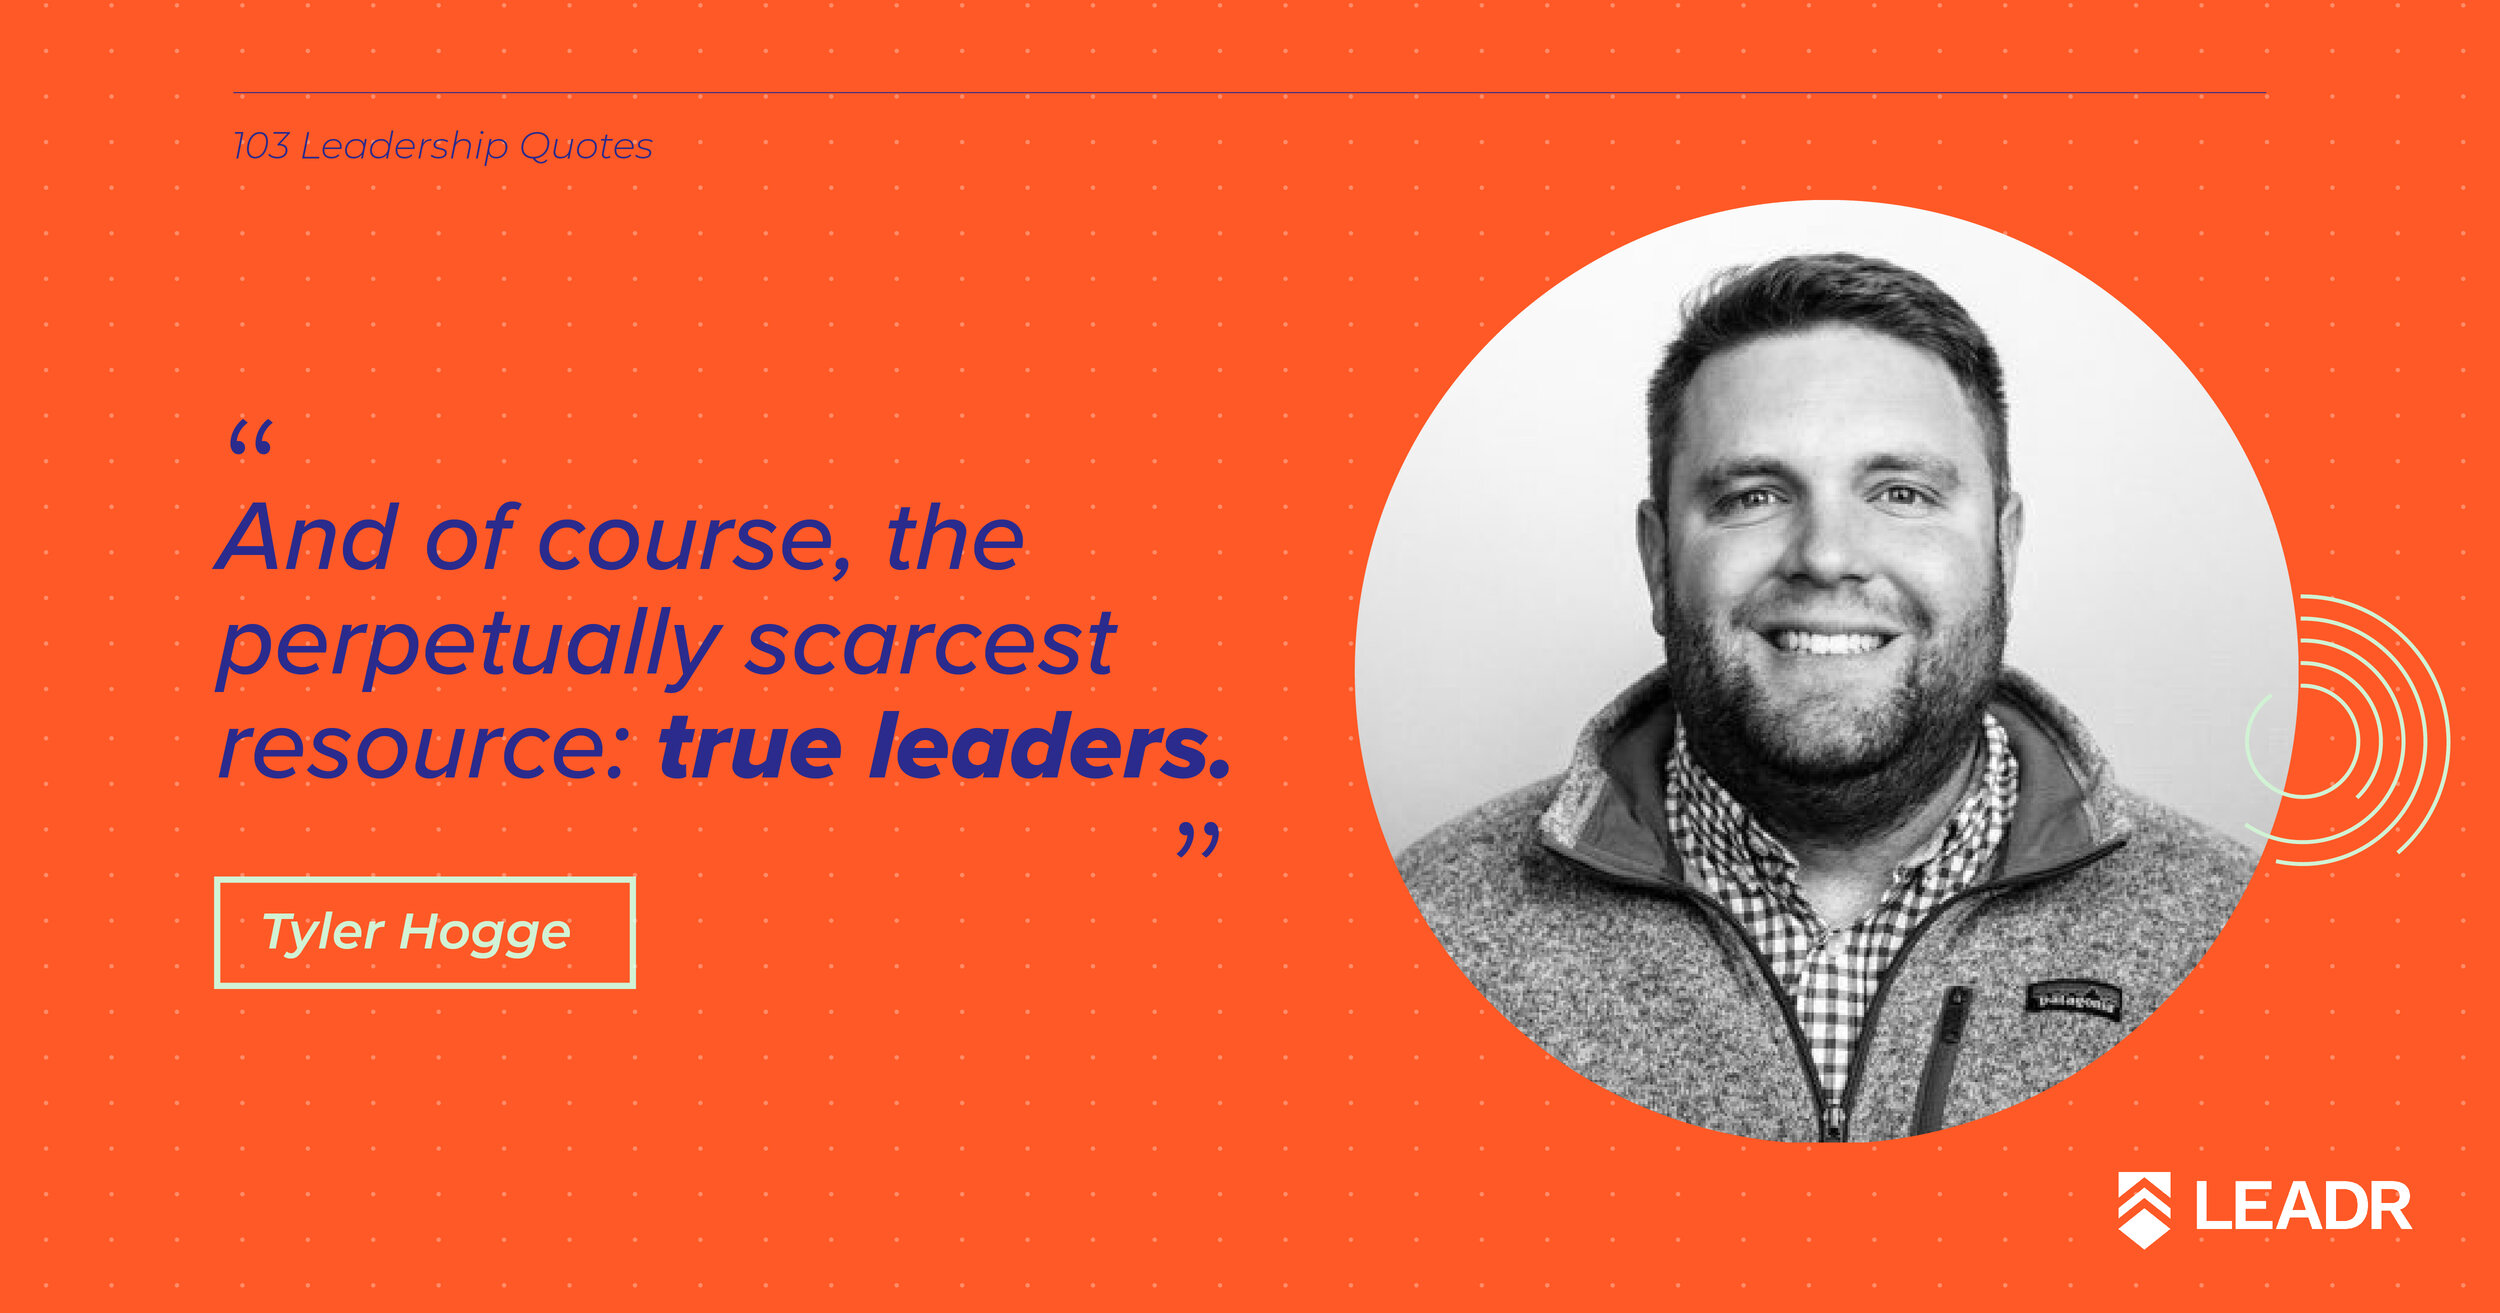 Royalty free downloadable leadership quotes - Tyler Hogge